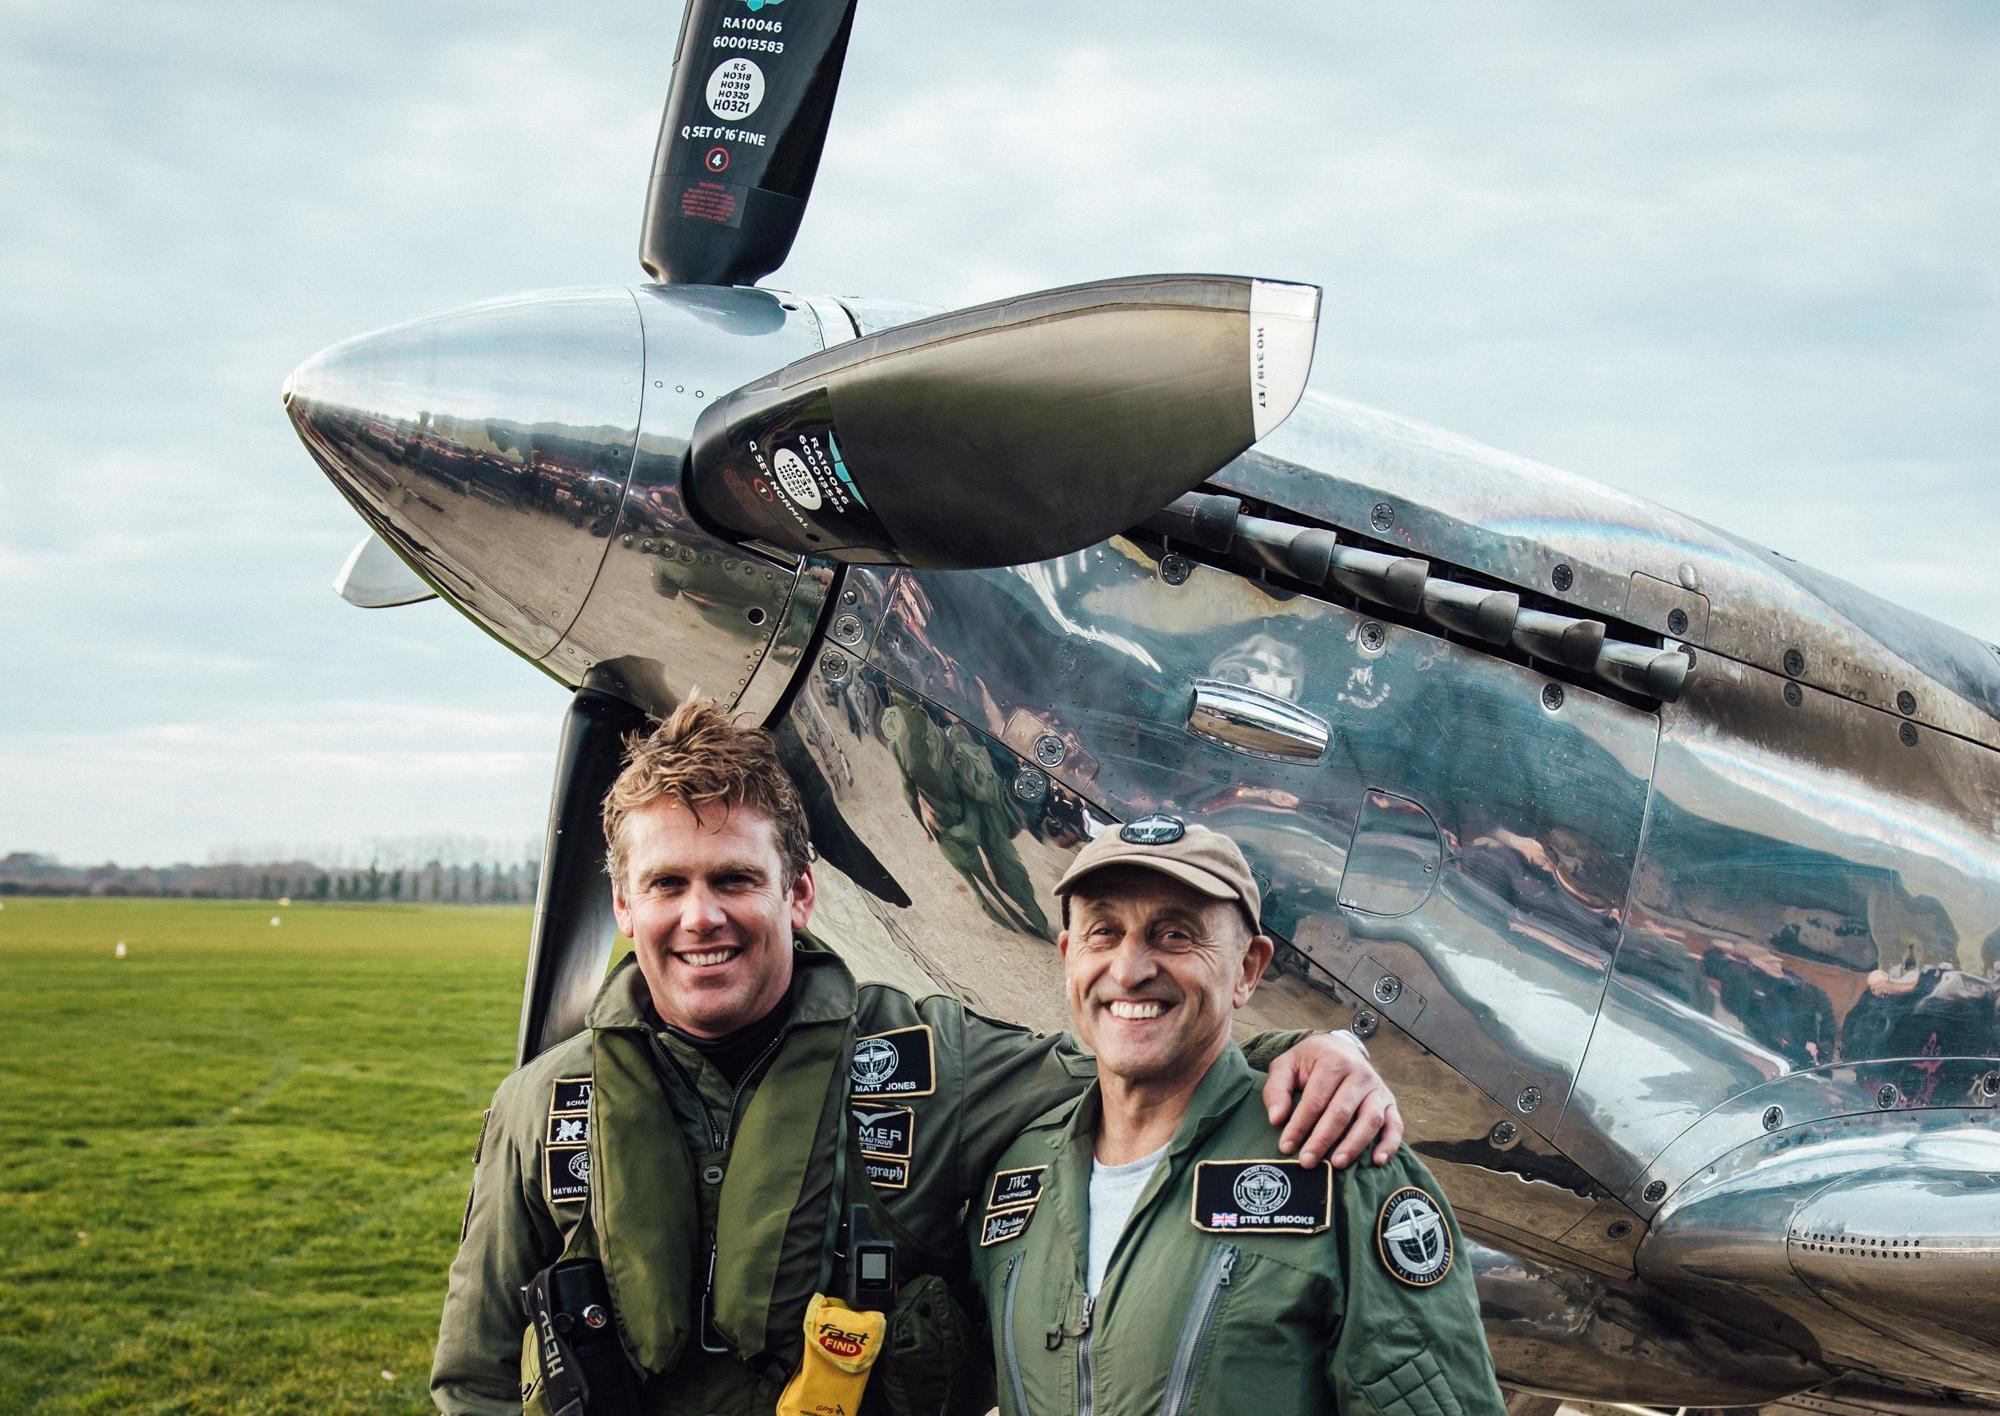 Two Goodwood pilots have landed back home after flying a Silver Spitfire around the world in four months. Photo by Christopher Busch for IWC Schaffhausen SUS-190512-175436001